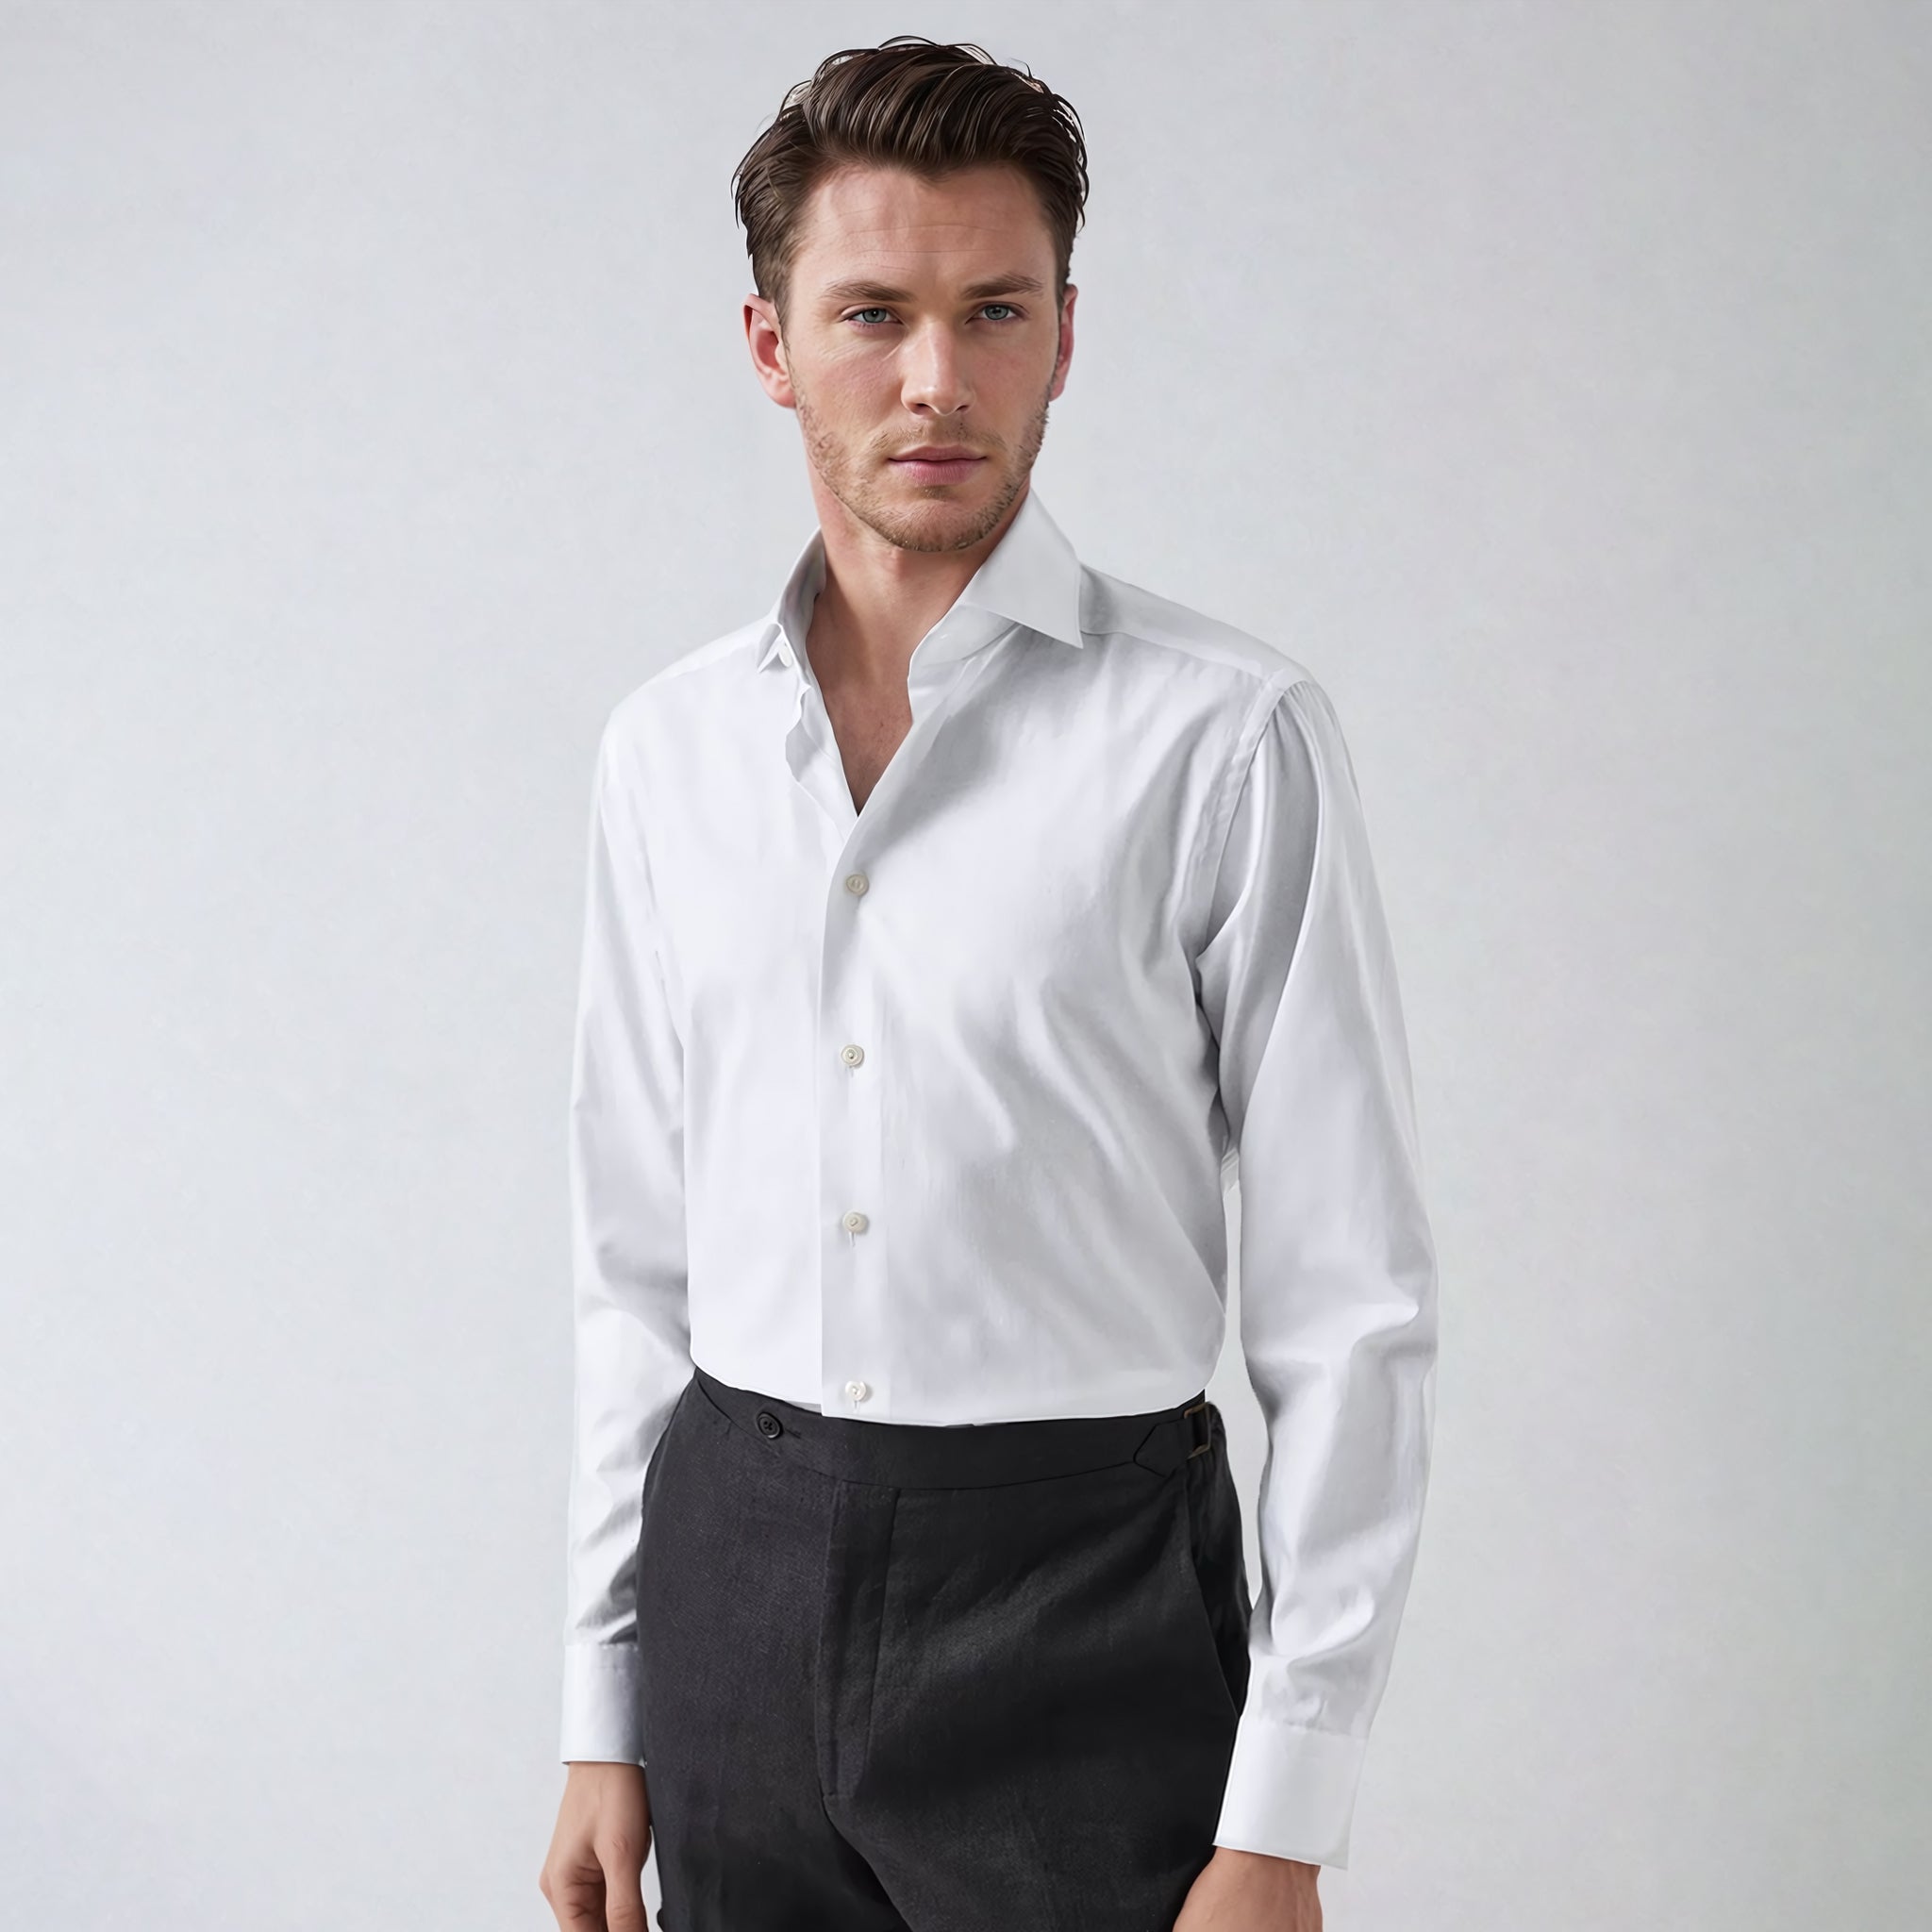 How to Identify a Superior Dress Shirt